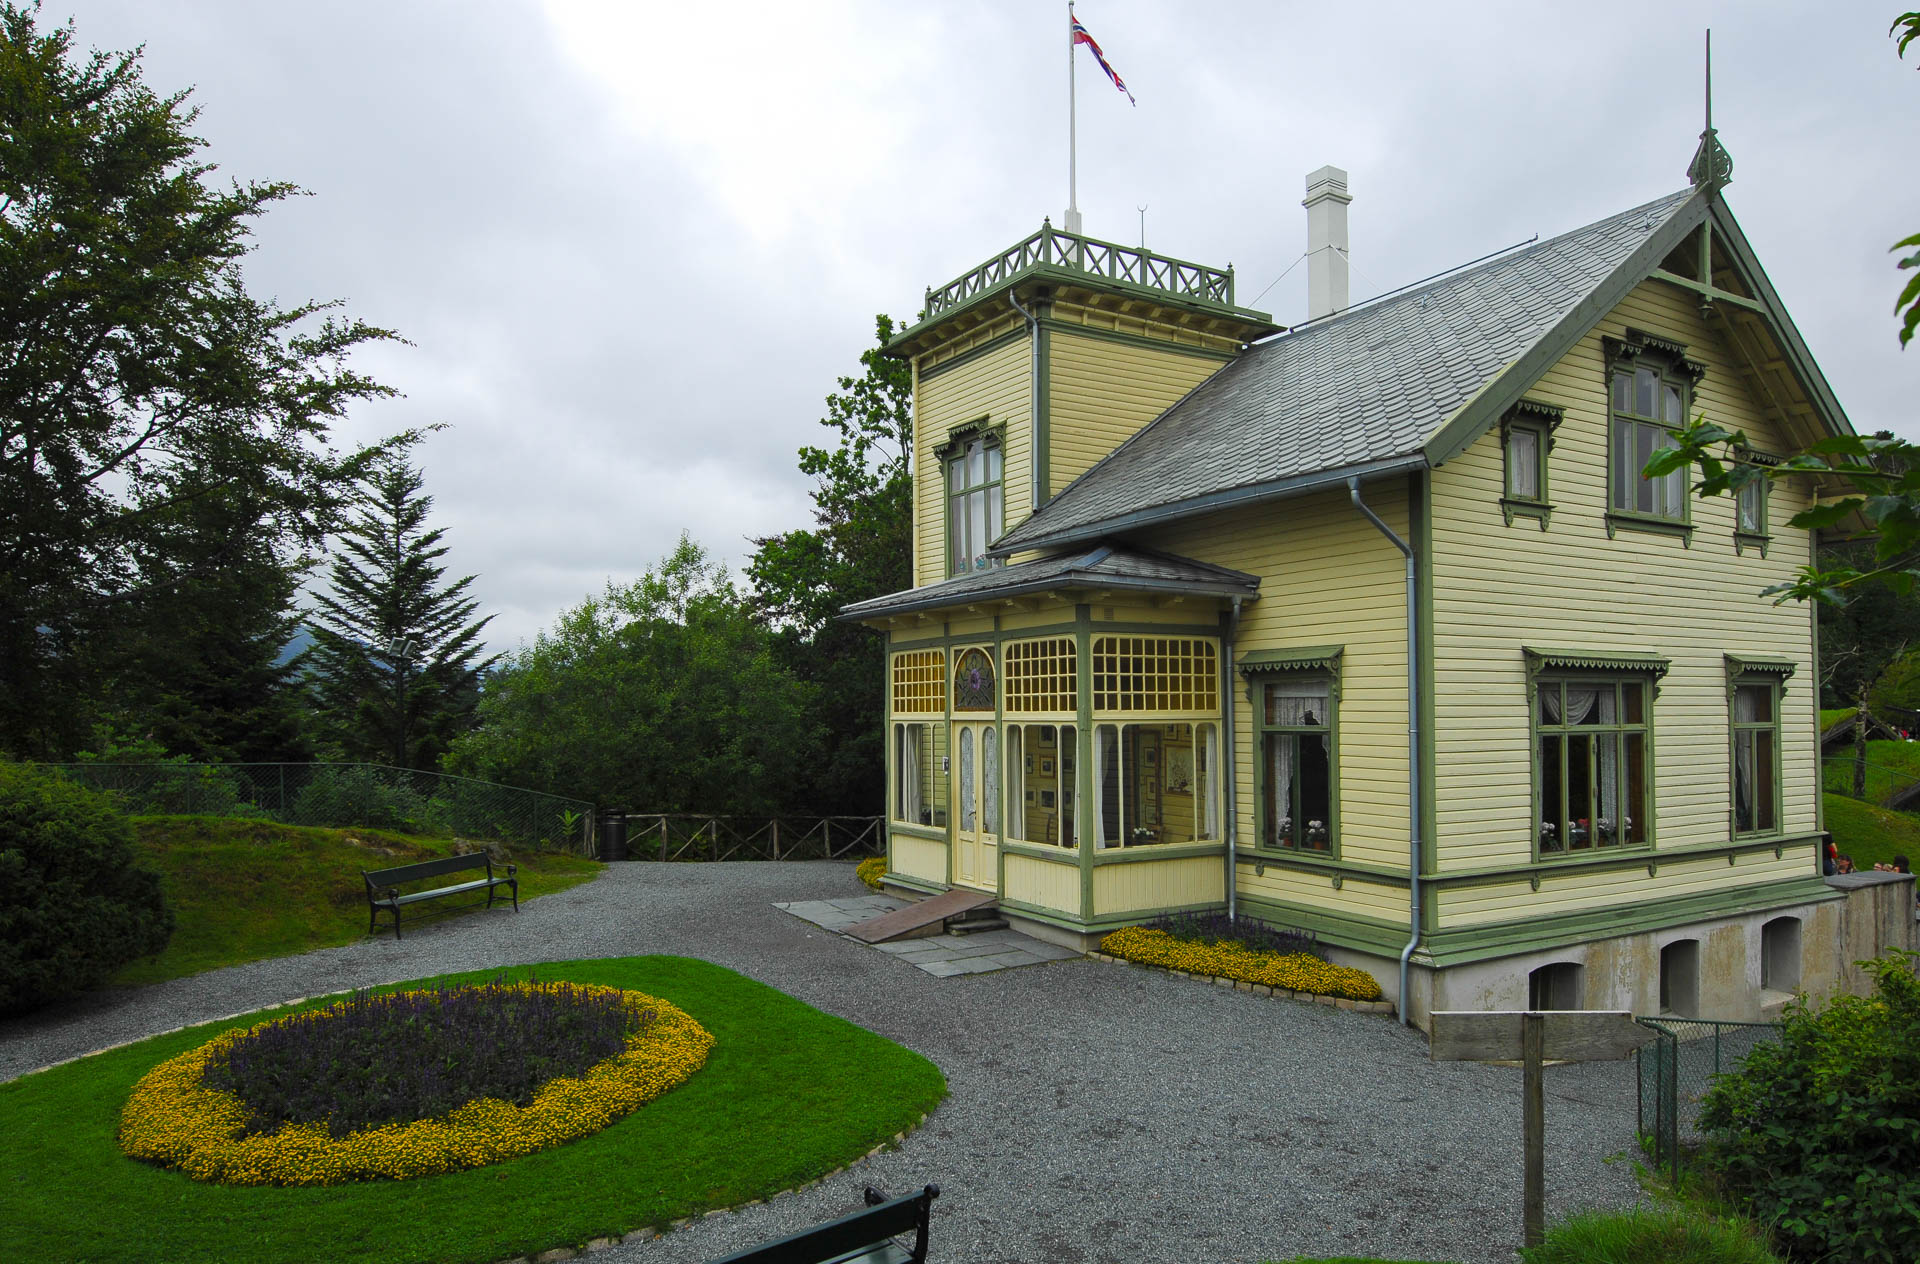 Trollhaugen where Edvard Grieg lived and worked